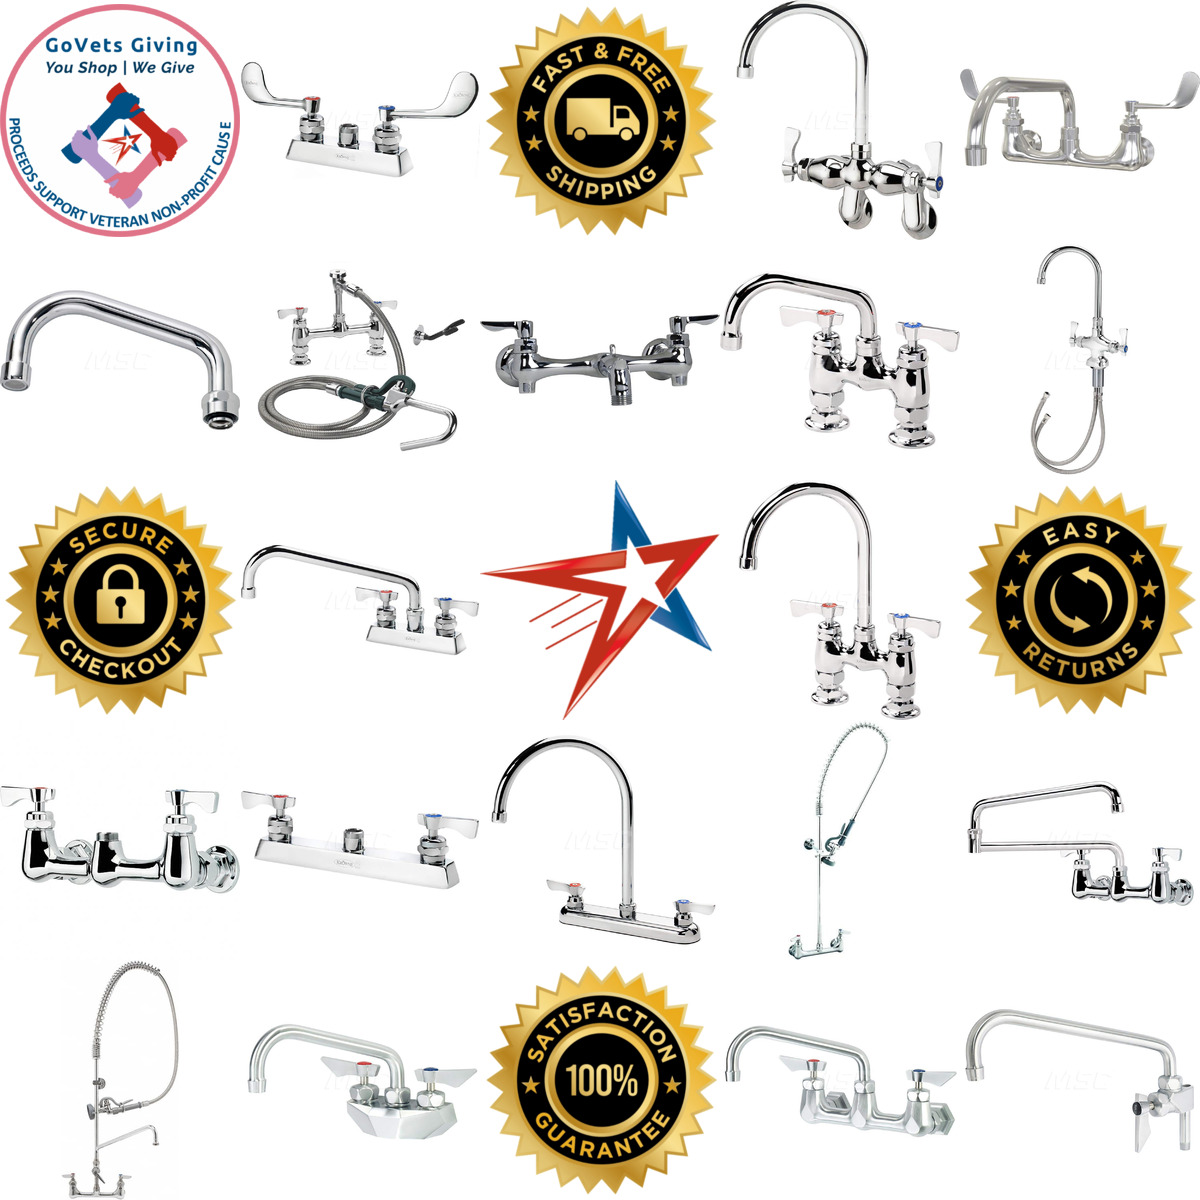 A selection of Industrial and Laundry Faucets products on GoVets